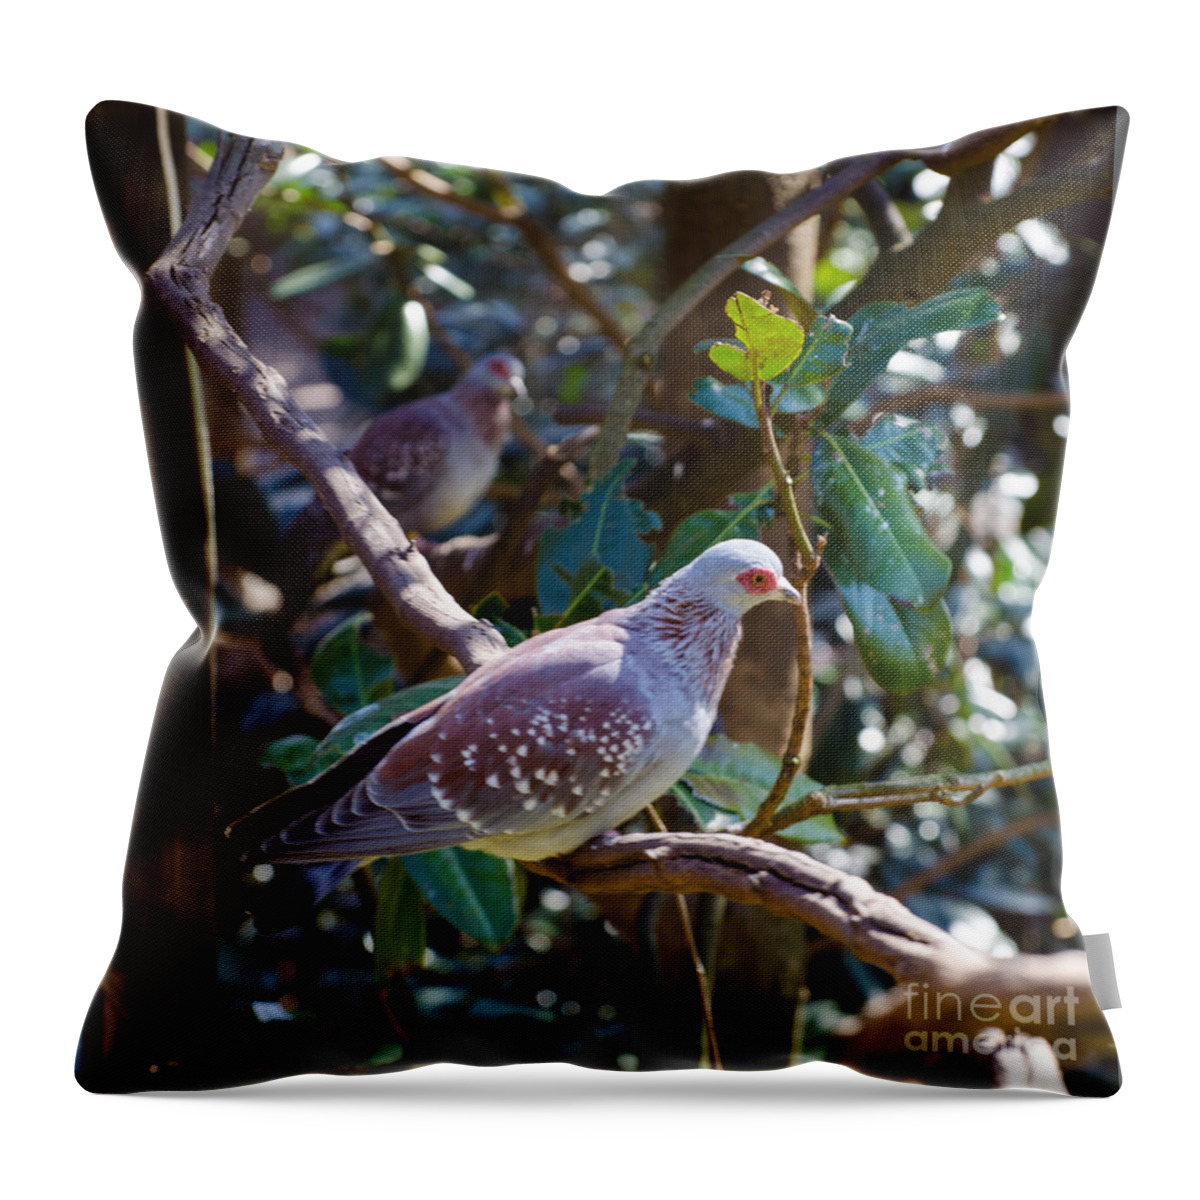 Bird Throw Pillow featuring the photograph Speckle Pigeon by Donna Brown